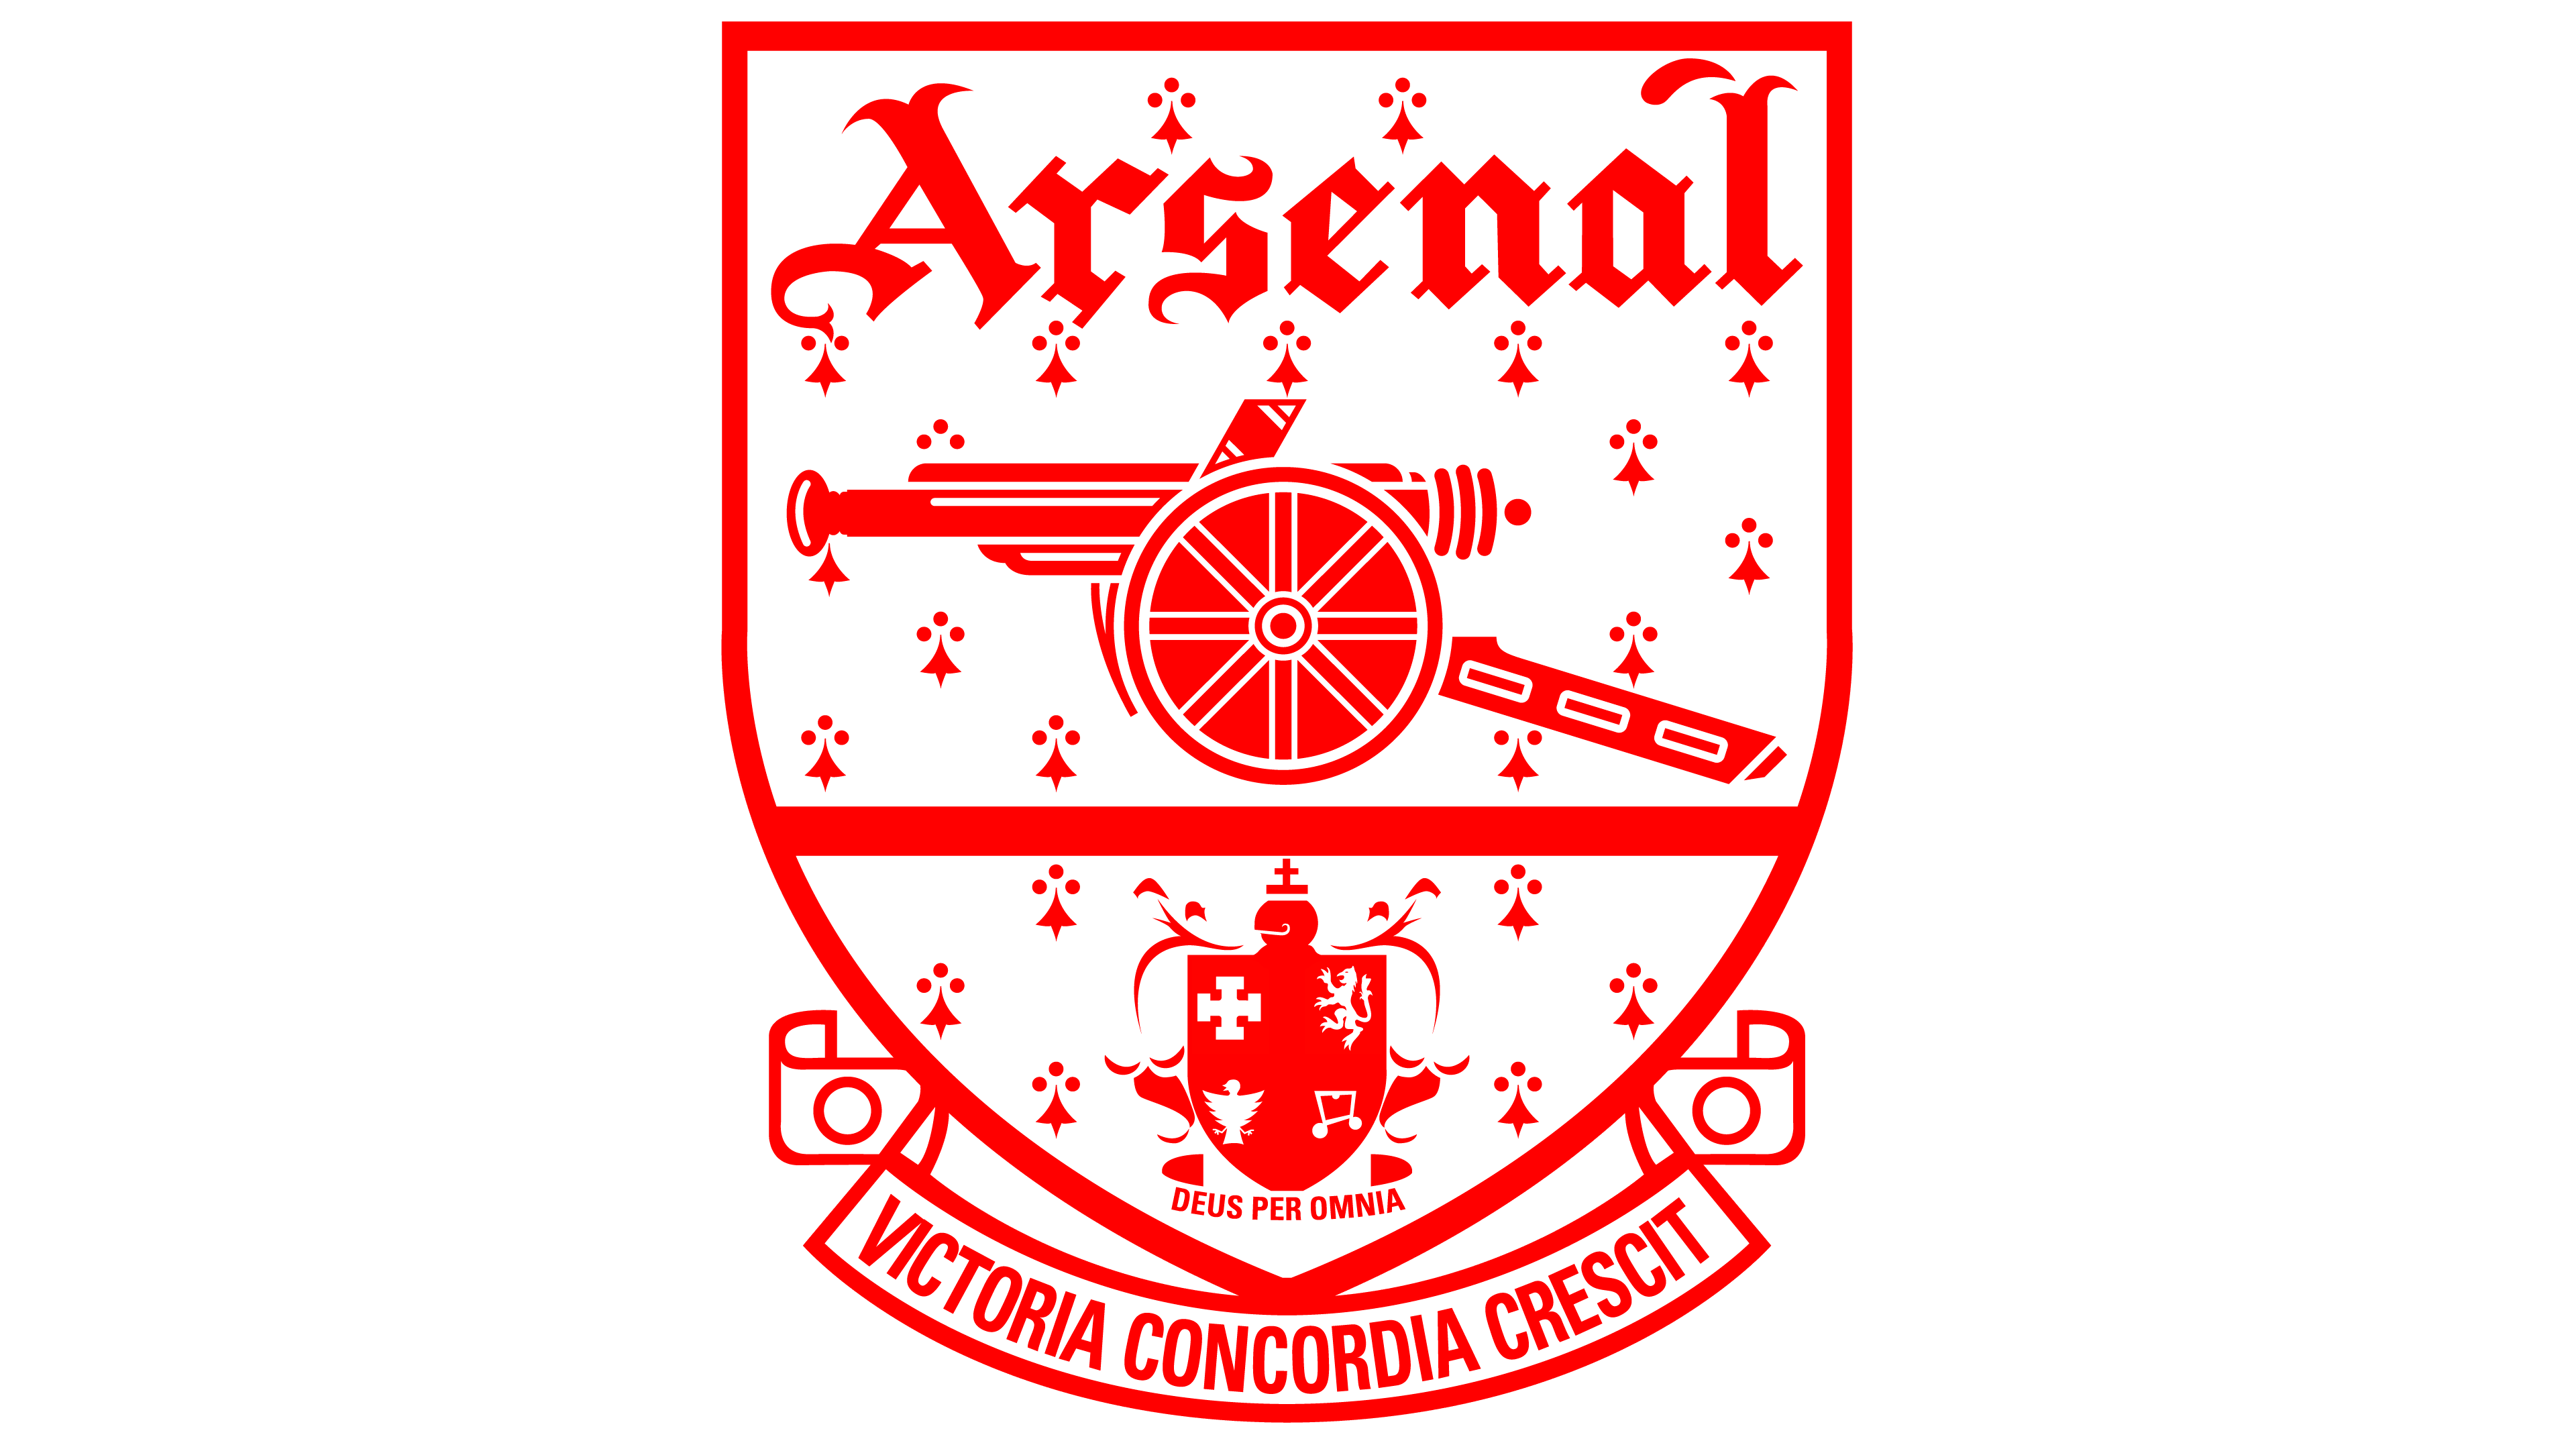 Arsenal Logo. The most famous brands and company logos in the world